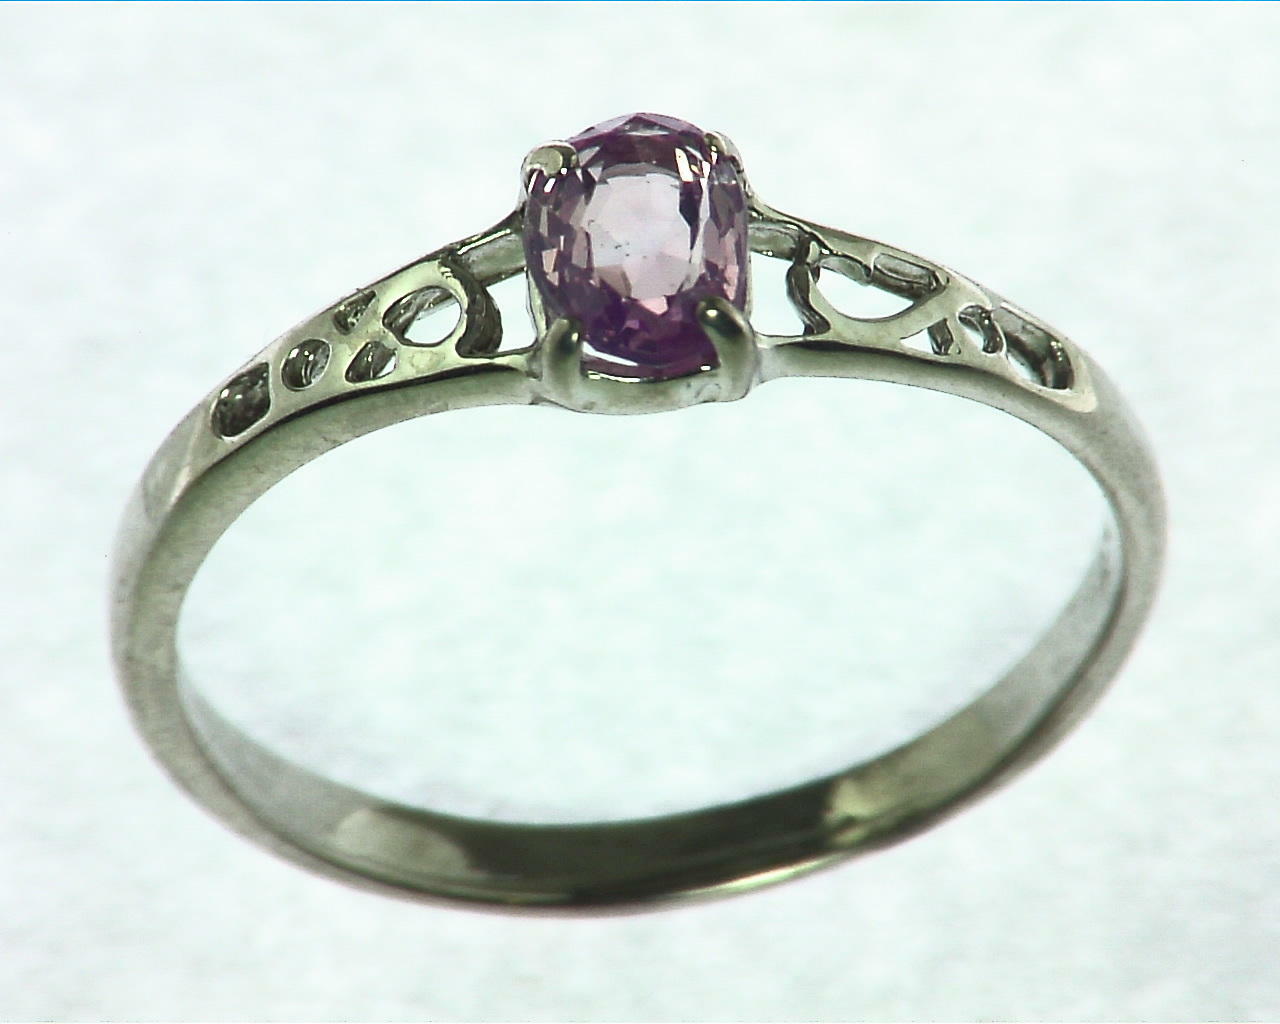 Pink Sapphire Sterling Silver Ring